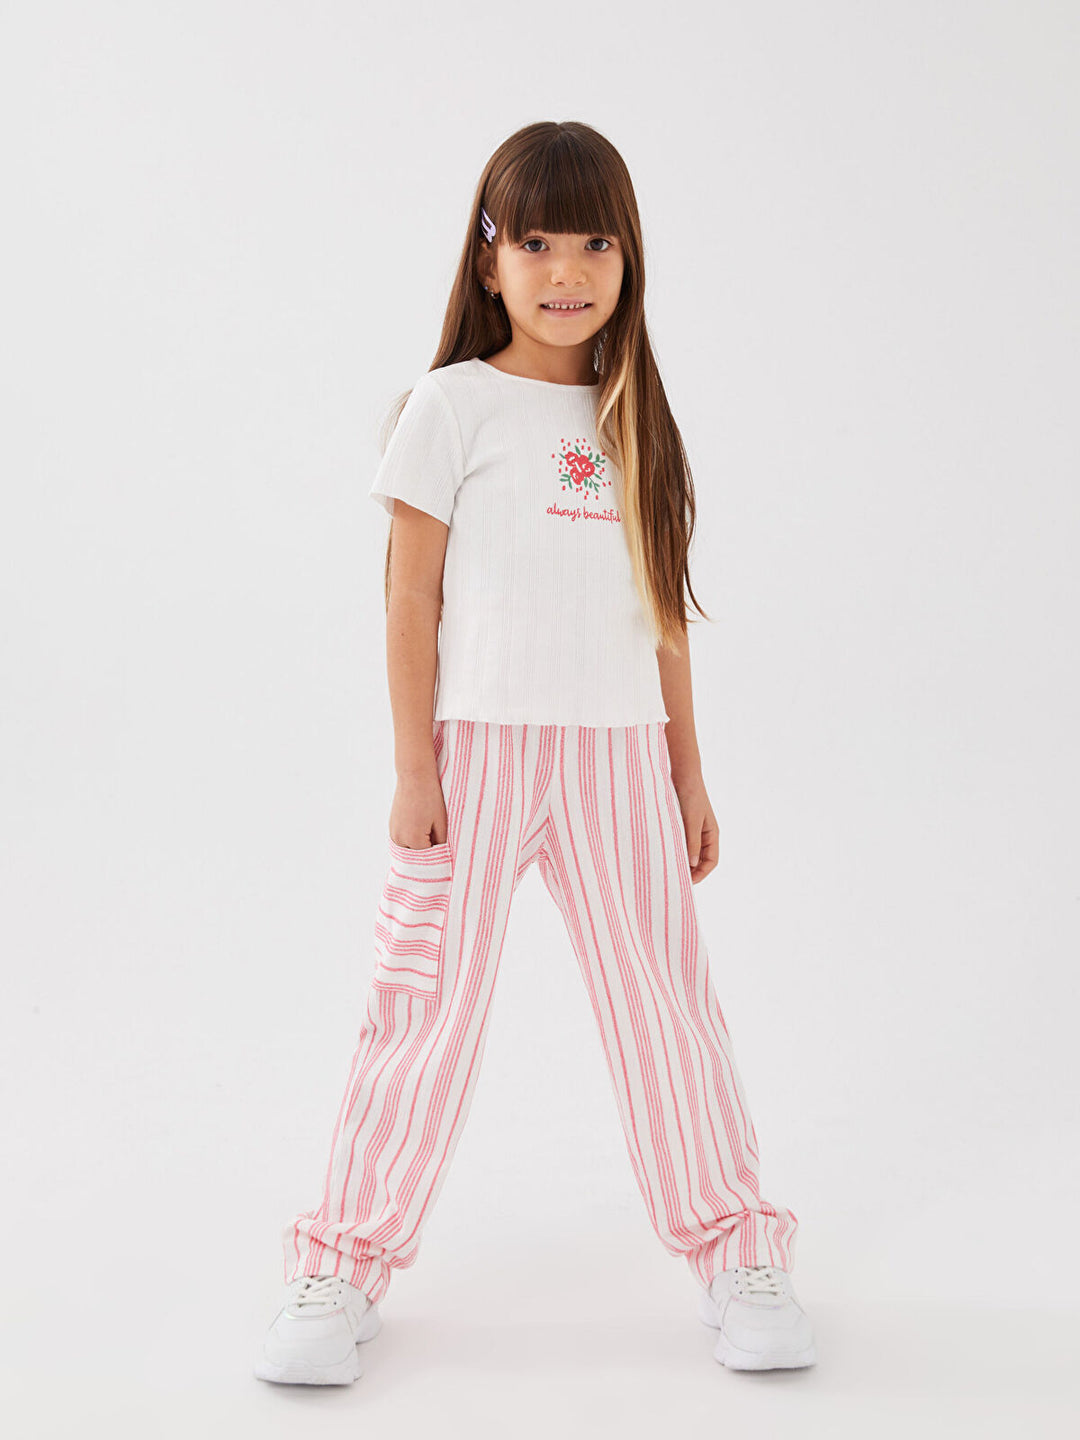 Ecru Crew Neck Printed Short Sleeve Girls T-Shirt And Trousers